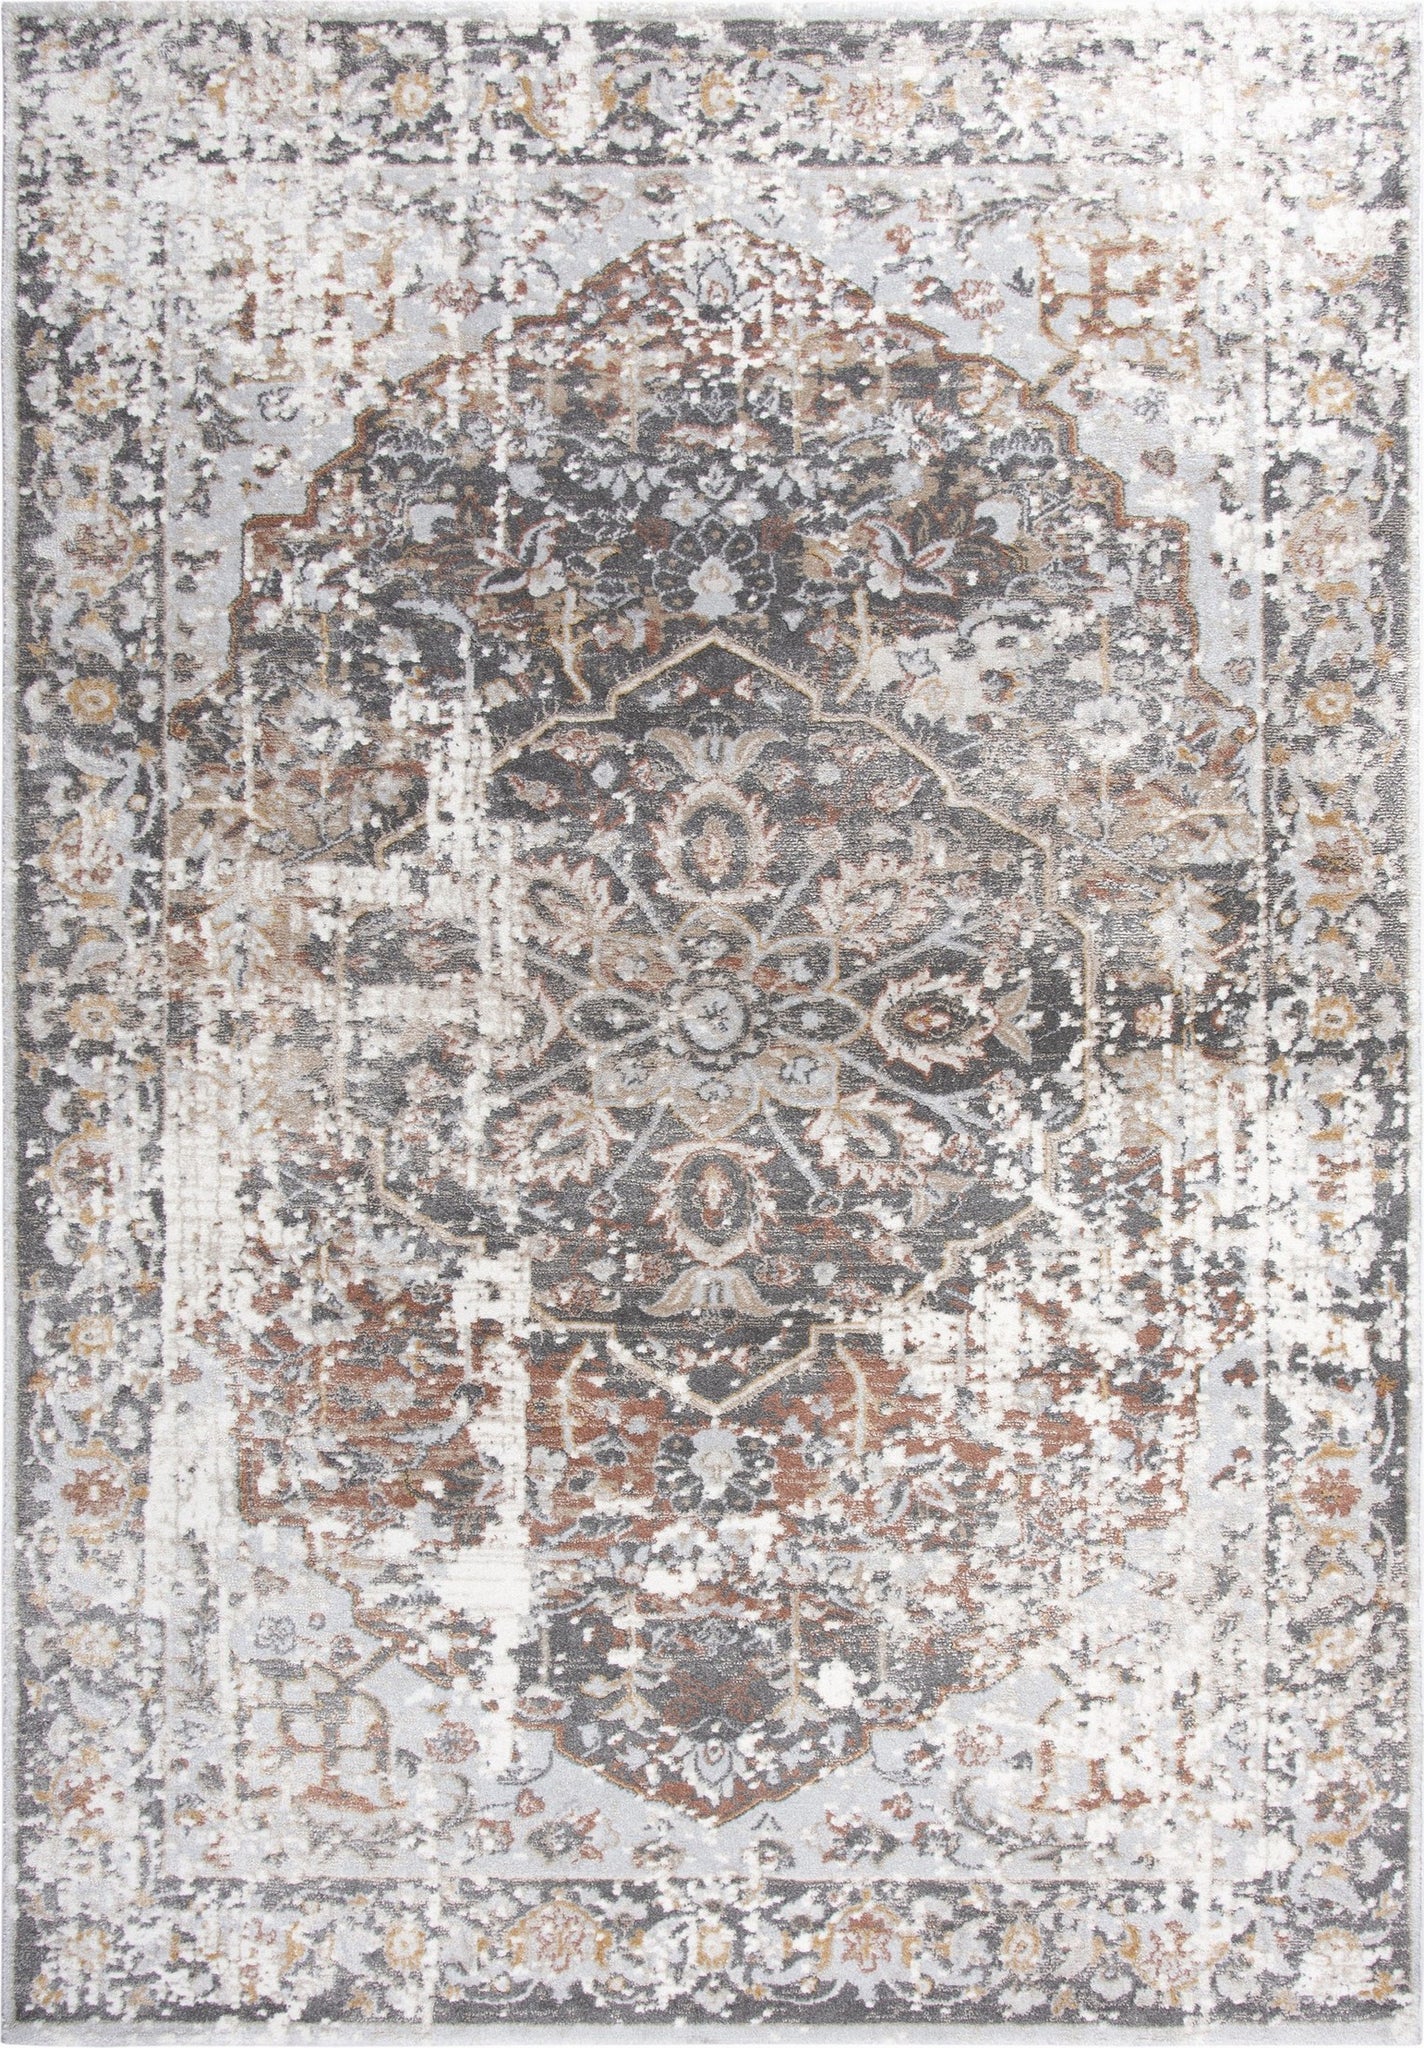 Rizzy Bristol BRS103 Beige/Copper Area Rug main image